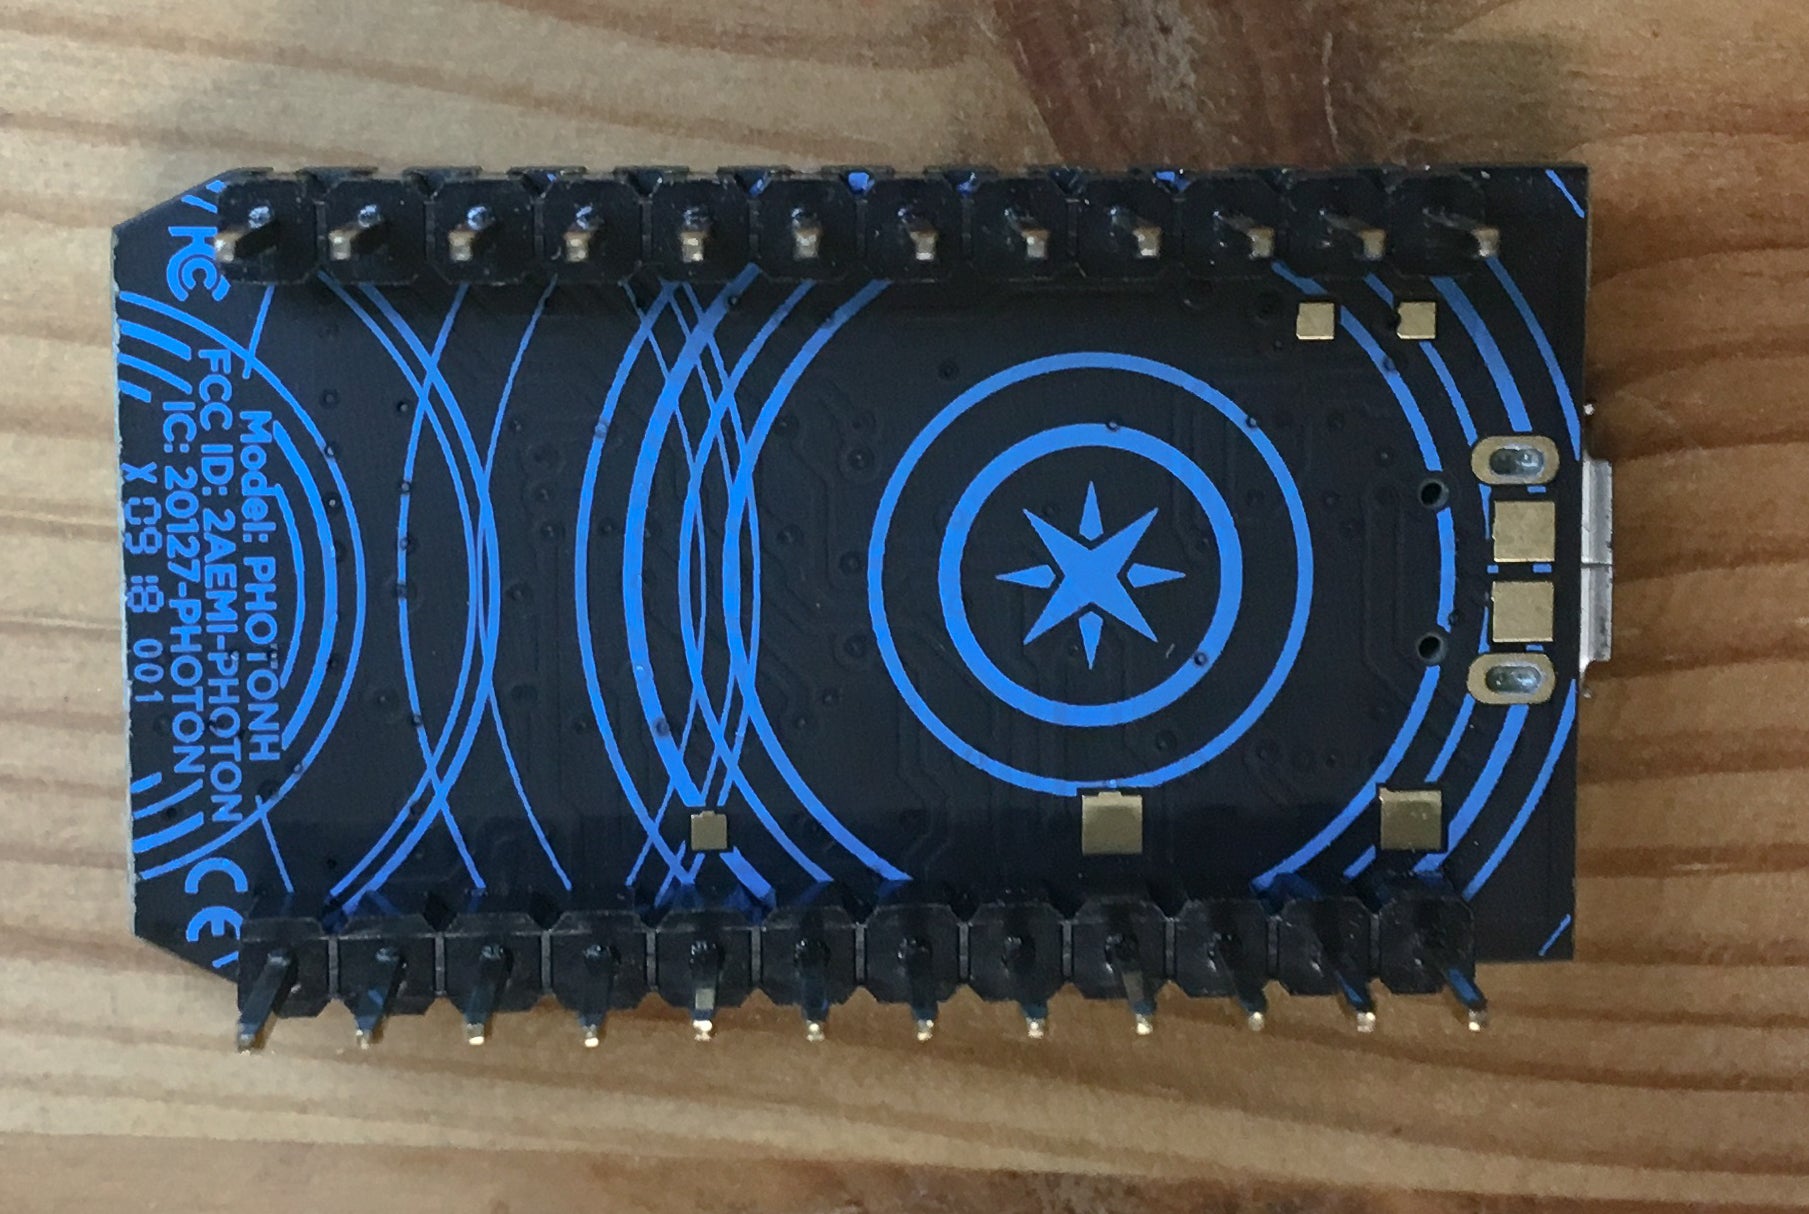 Particle Photon - IoT Development Board with Particle Cloud - Server On The Move